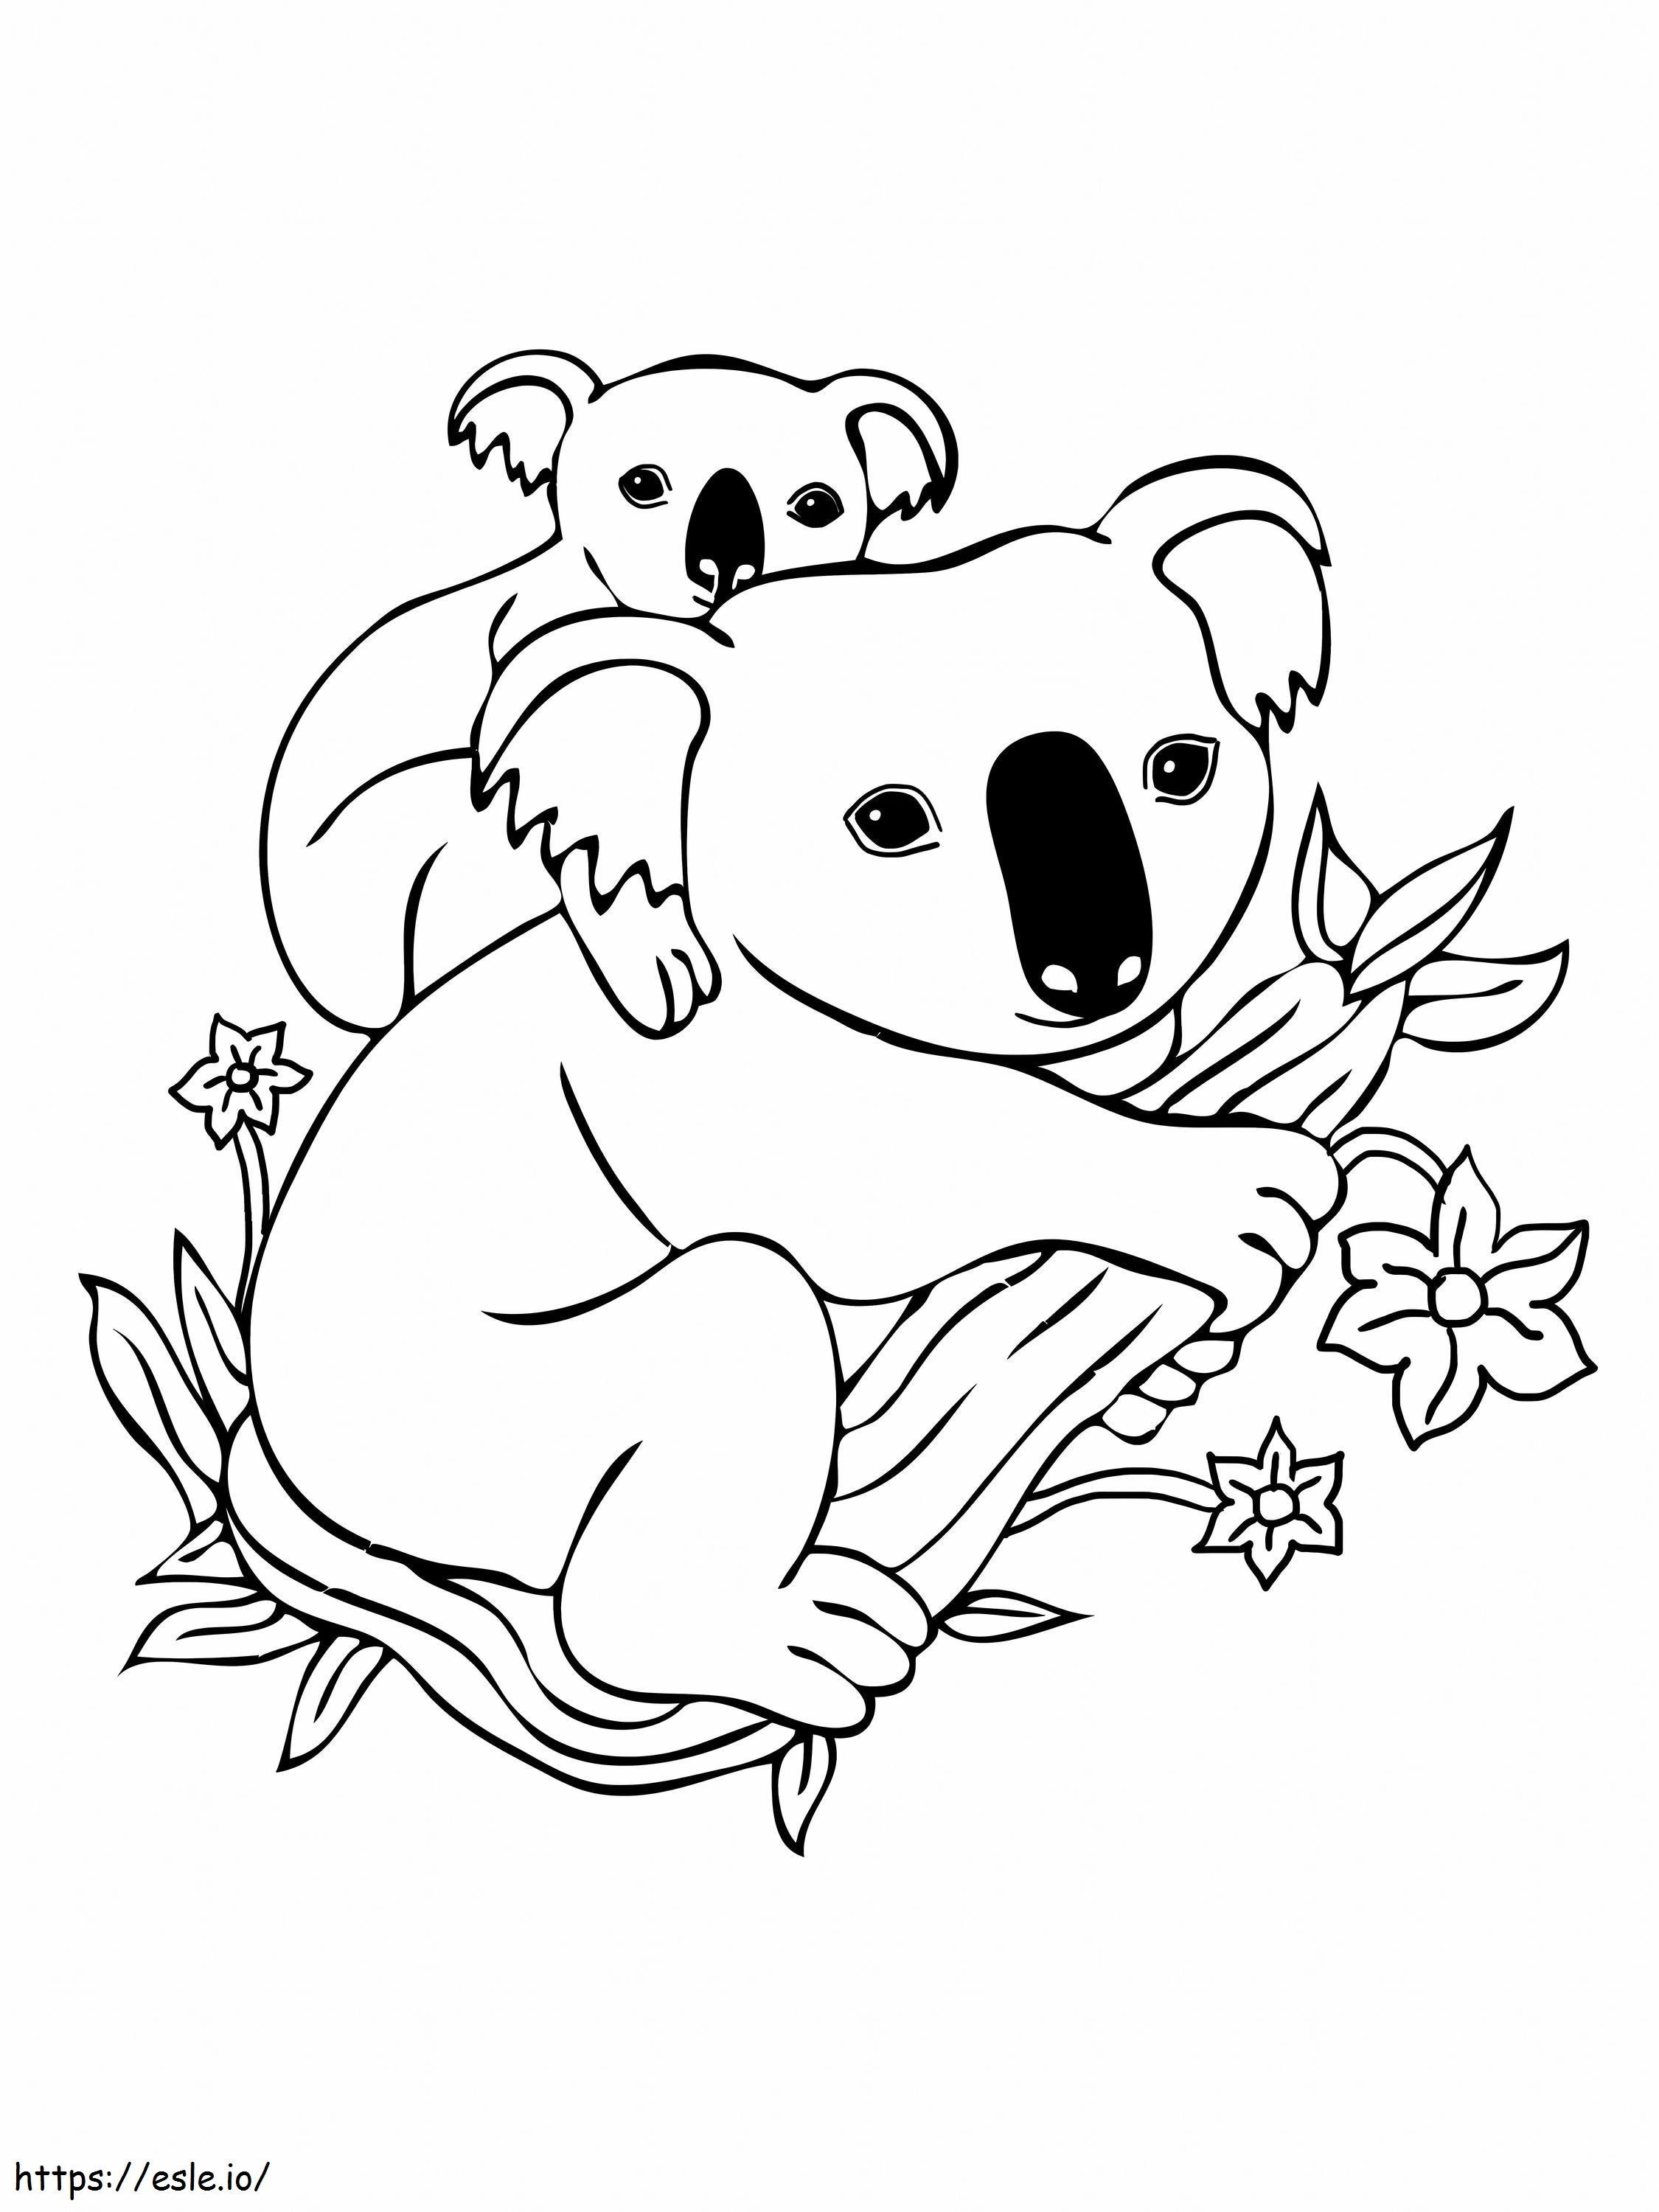 Mother Koala With Baby Koala On Tree Branch coloring page